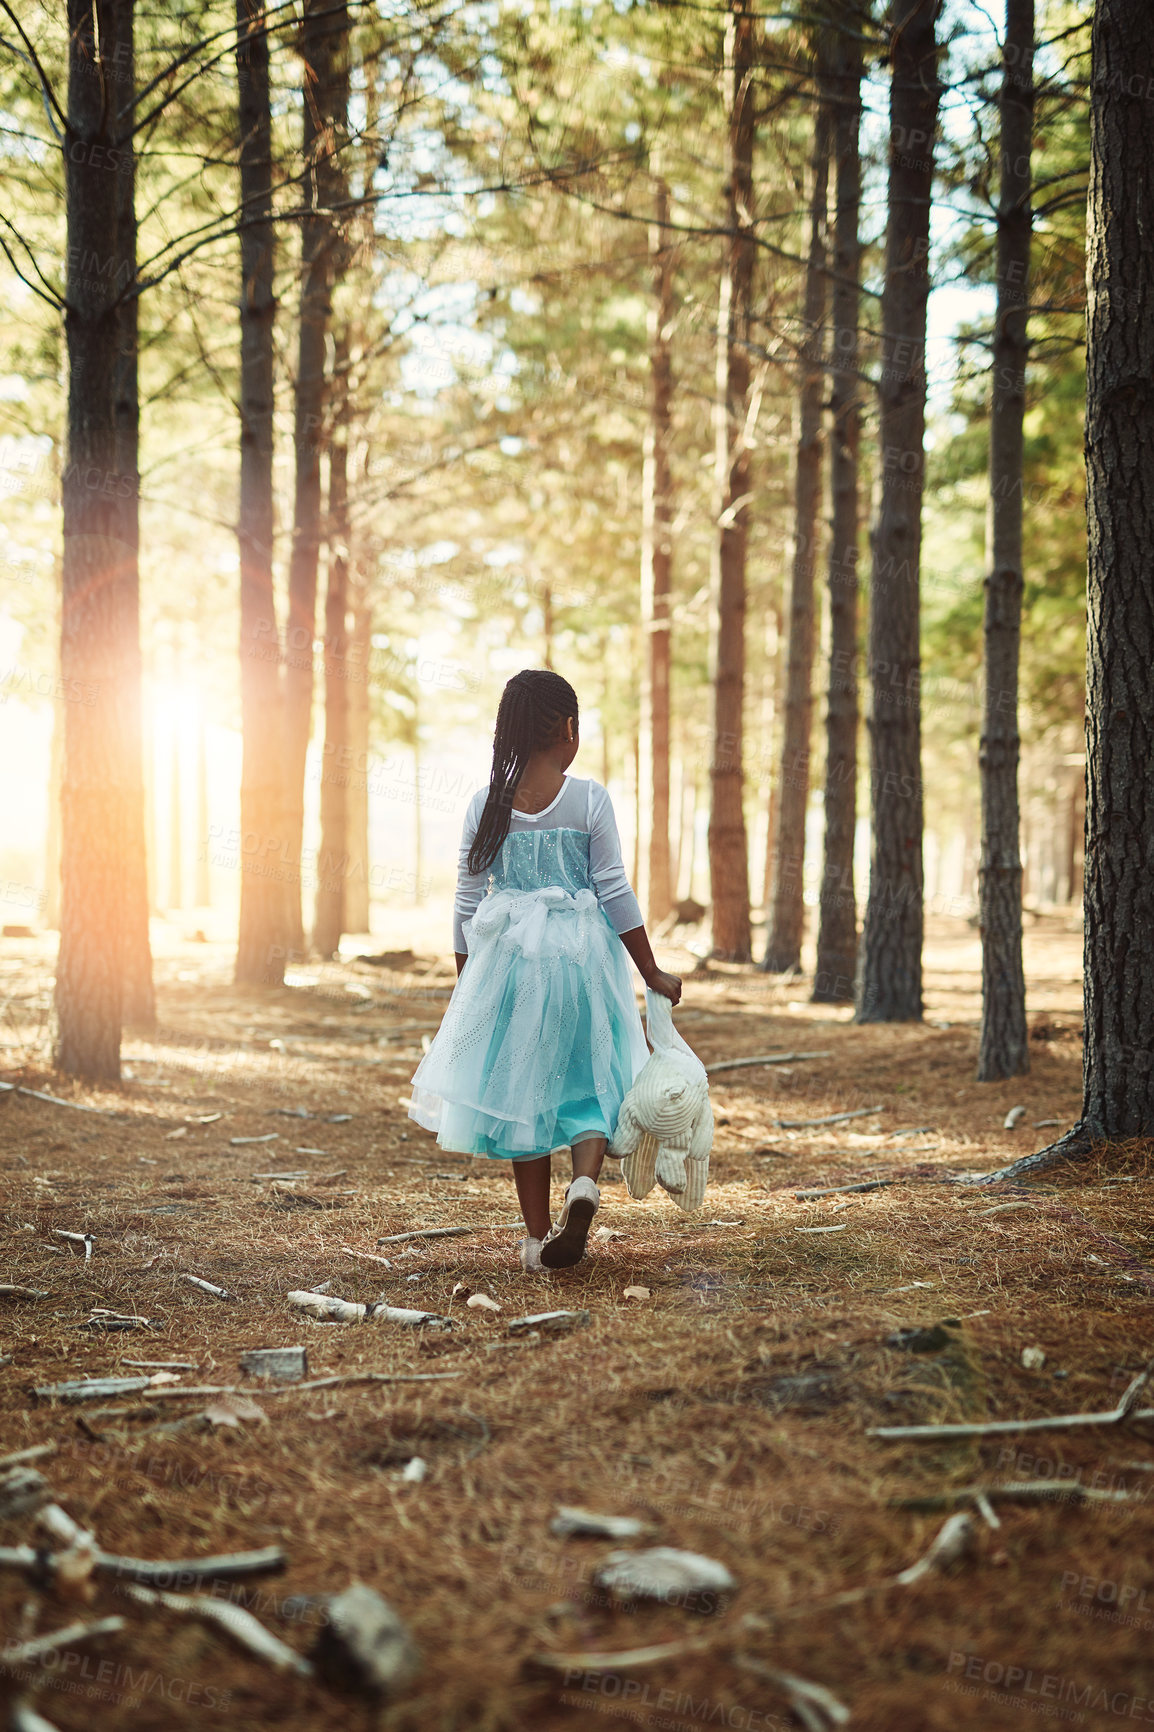 Buy stock photo Rear view shot of a little girl walking in the woods with her teddybear